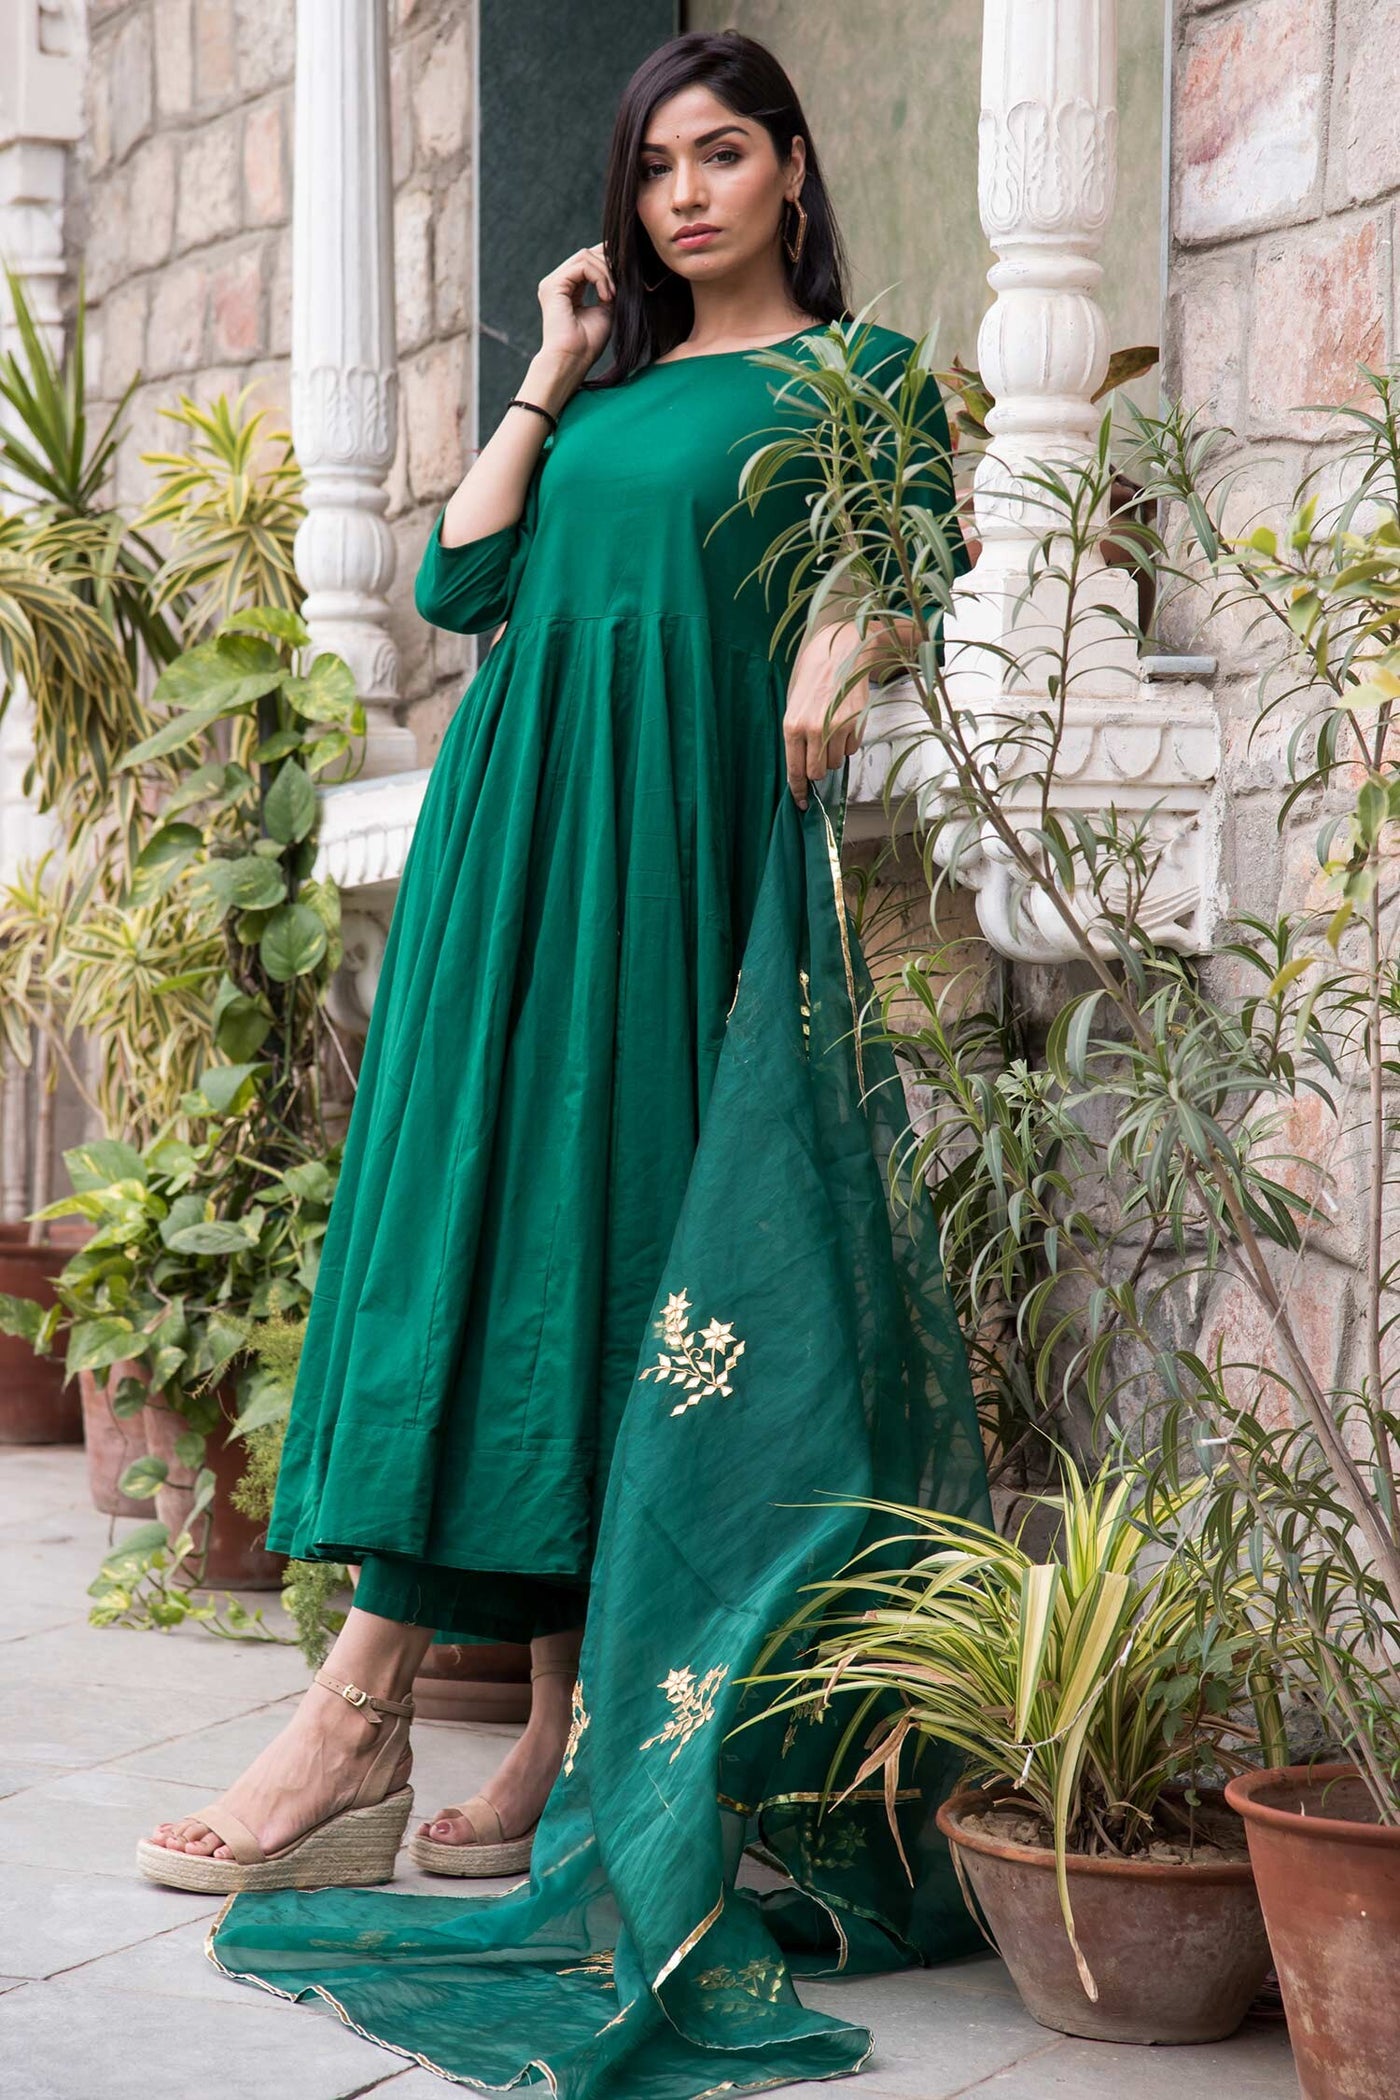 Green Cotton Mul Anarkali Set - Indian Clothing in Denver, CO, Aurora, CO, Boulder, CO, Fort Collins, CO, Colorado Springs, CO, Parker, CO, Highlands Ranch, CO, Cherry Creek, CO, Centennial, CO, and Longmont, CO. Nationwide shipping USA - India Fashion X